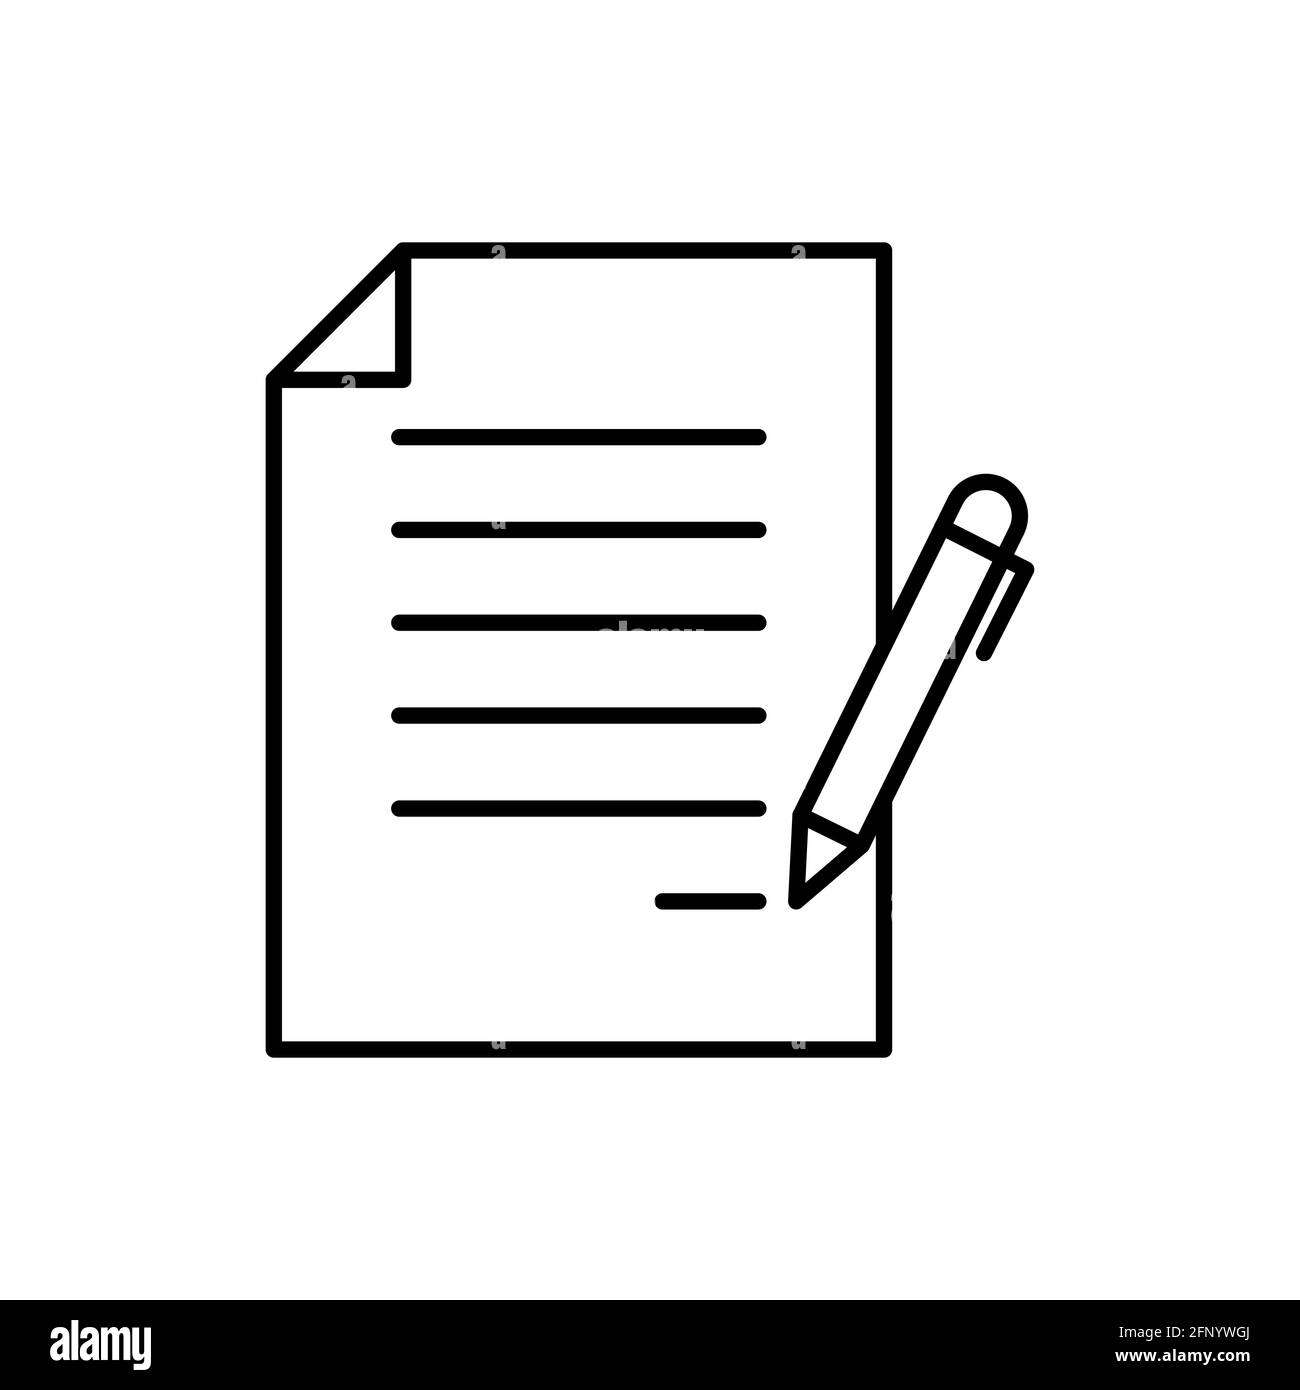 Document line icon. Paper outline symbol. Vector illustration isolated on white Stock Vector